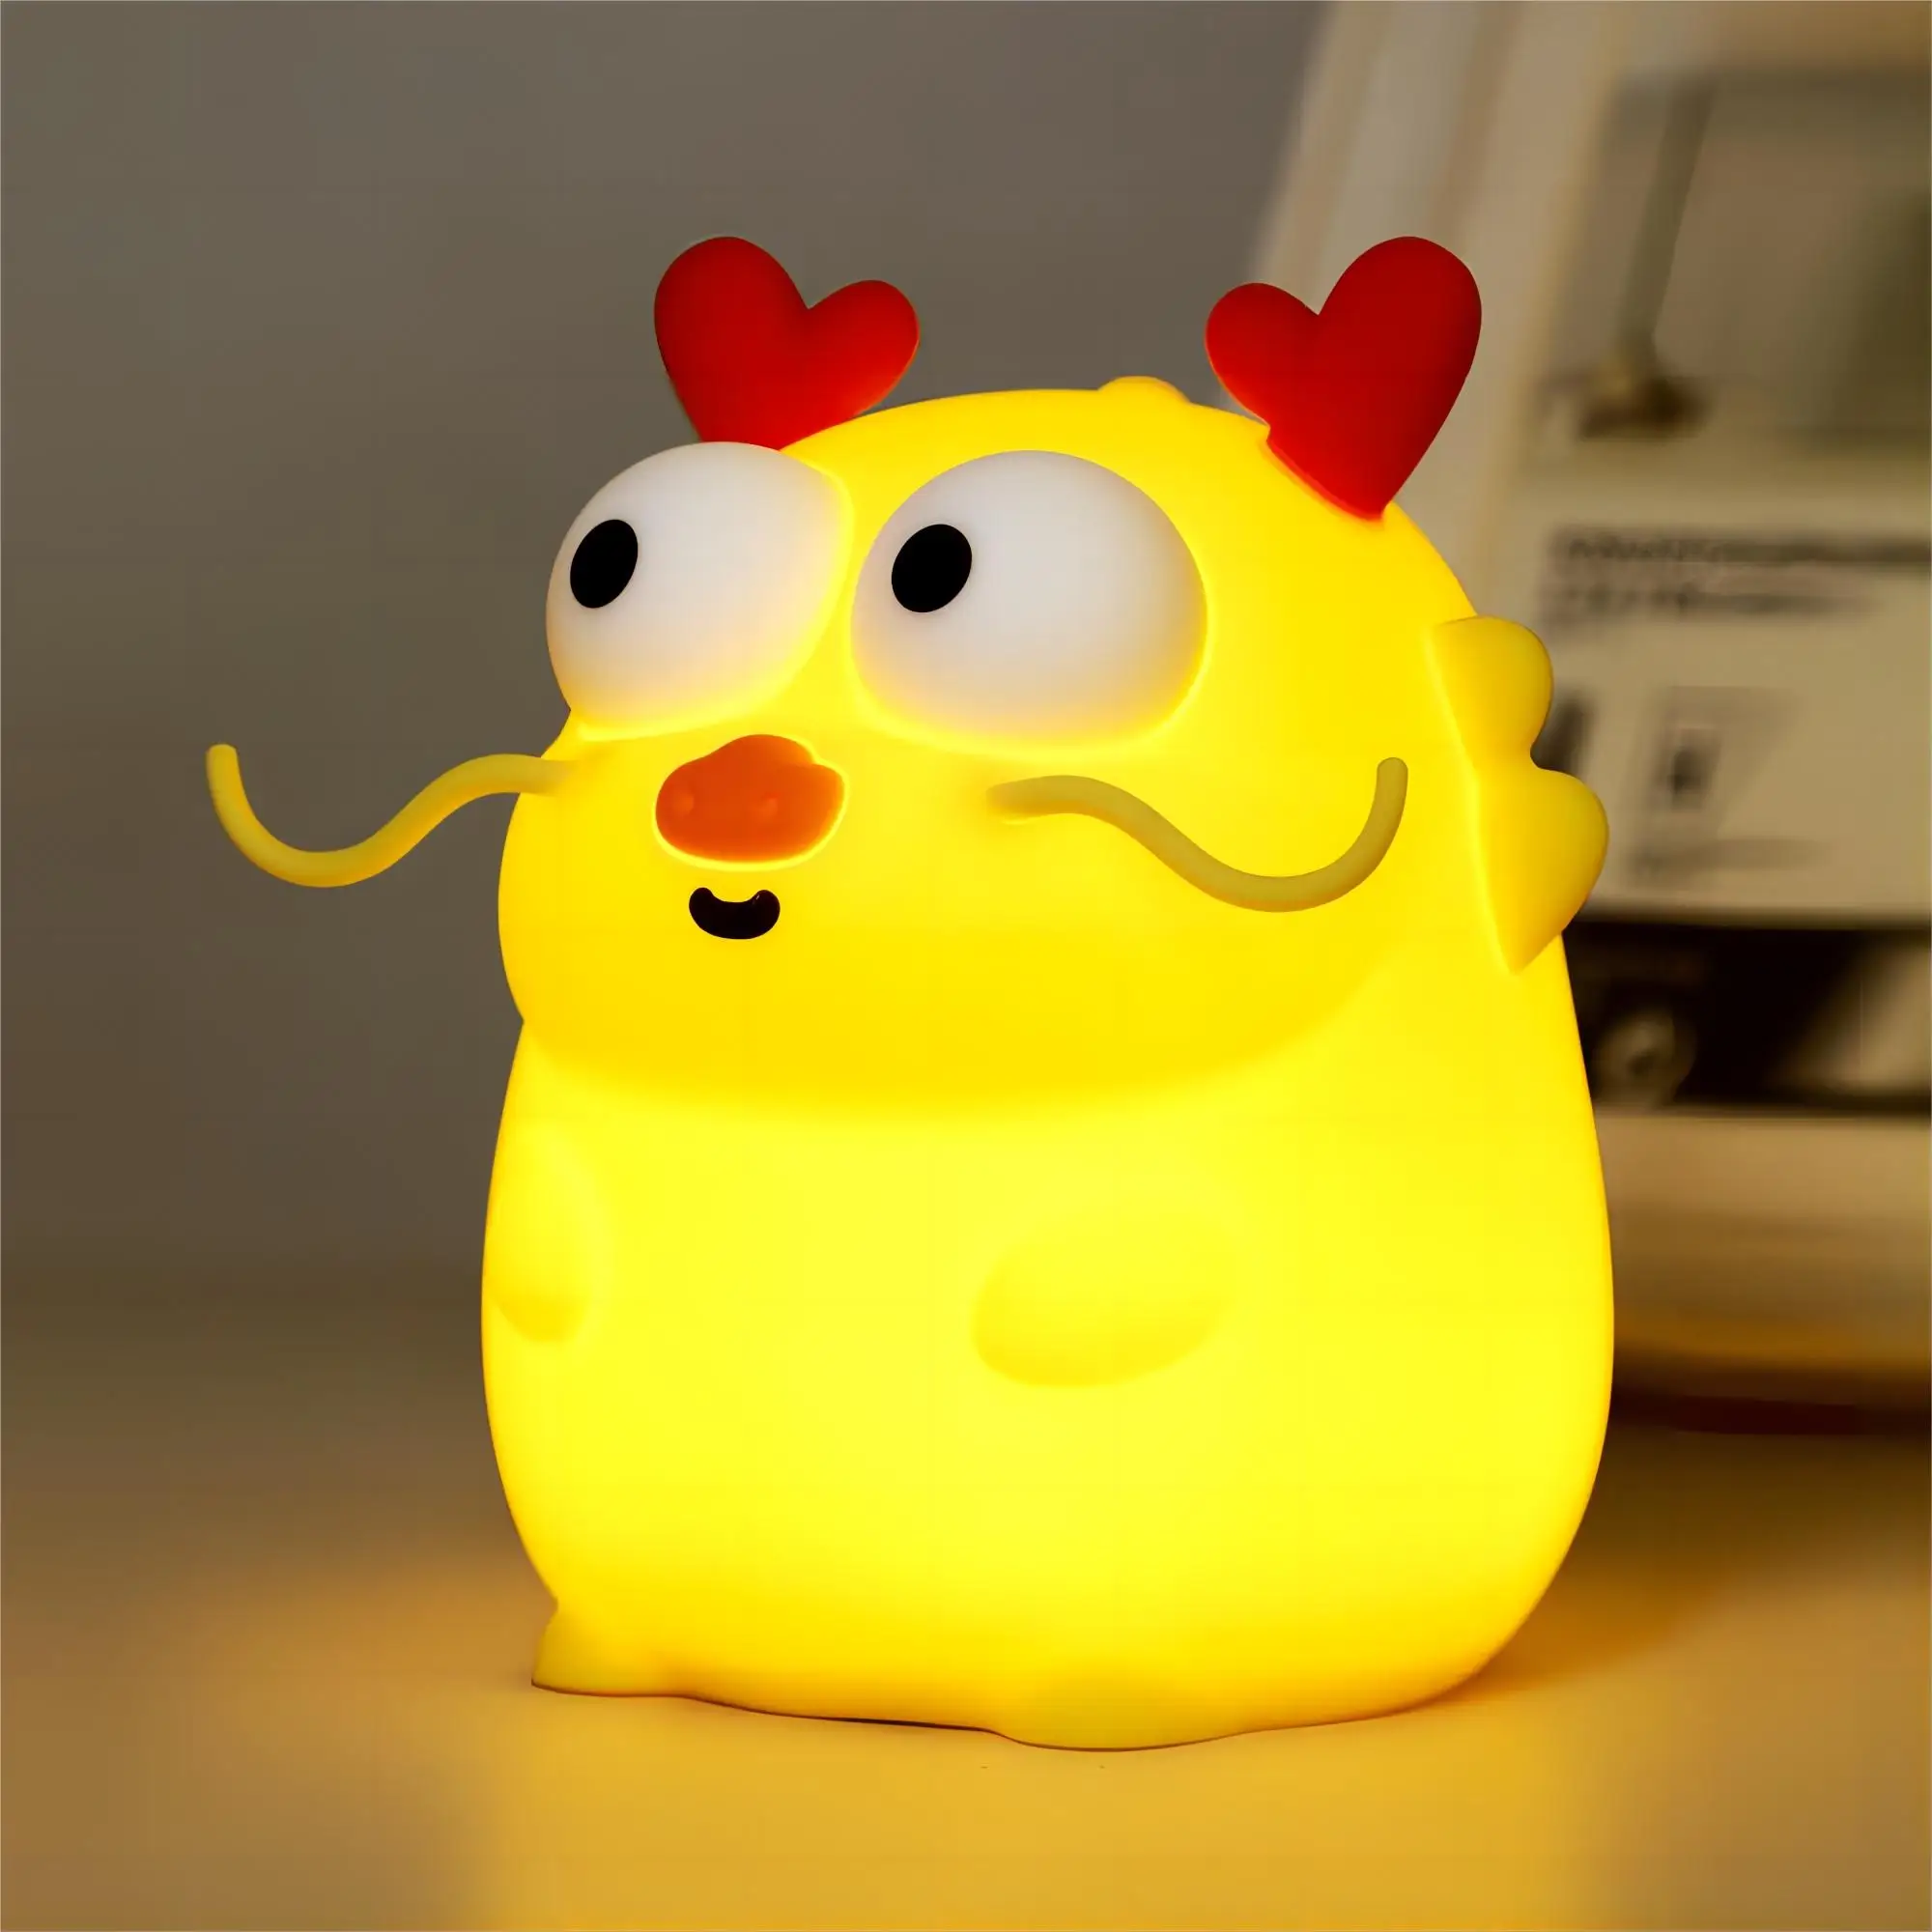 

New Dragon Night Light USB Rechargeable 7 Colors Dimmable Nursery Nightlight Touch Sleeping Lamp for Baby Kids Decor